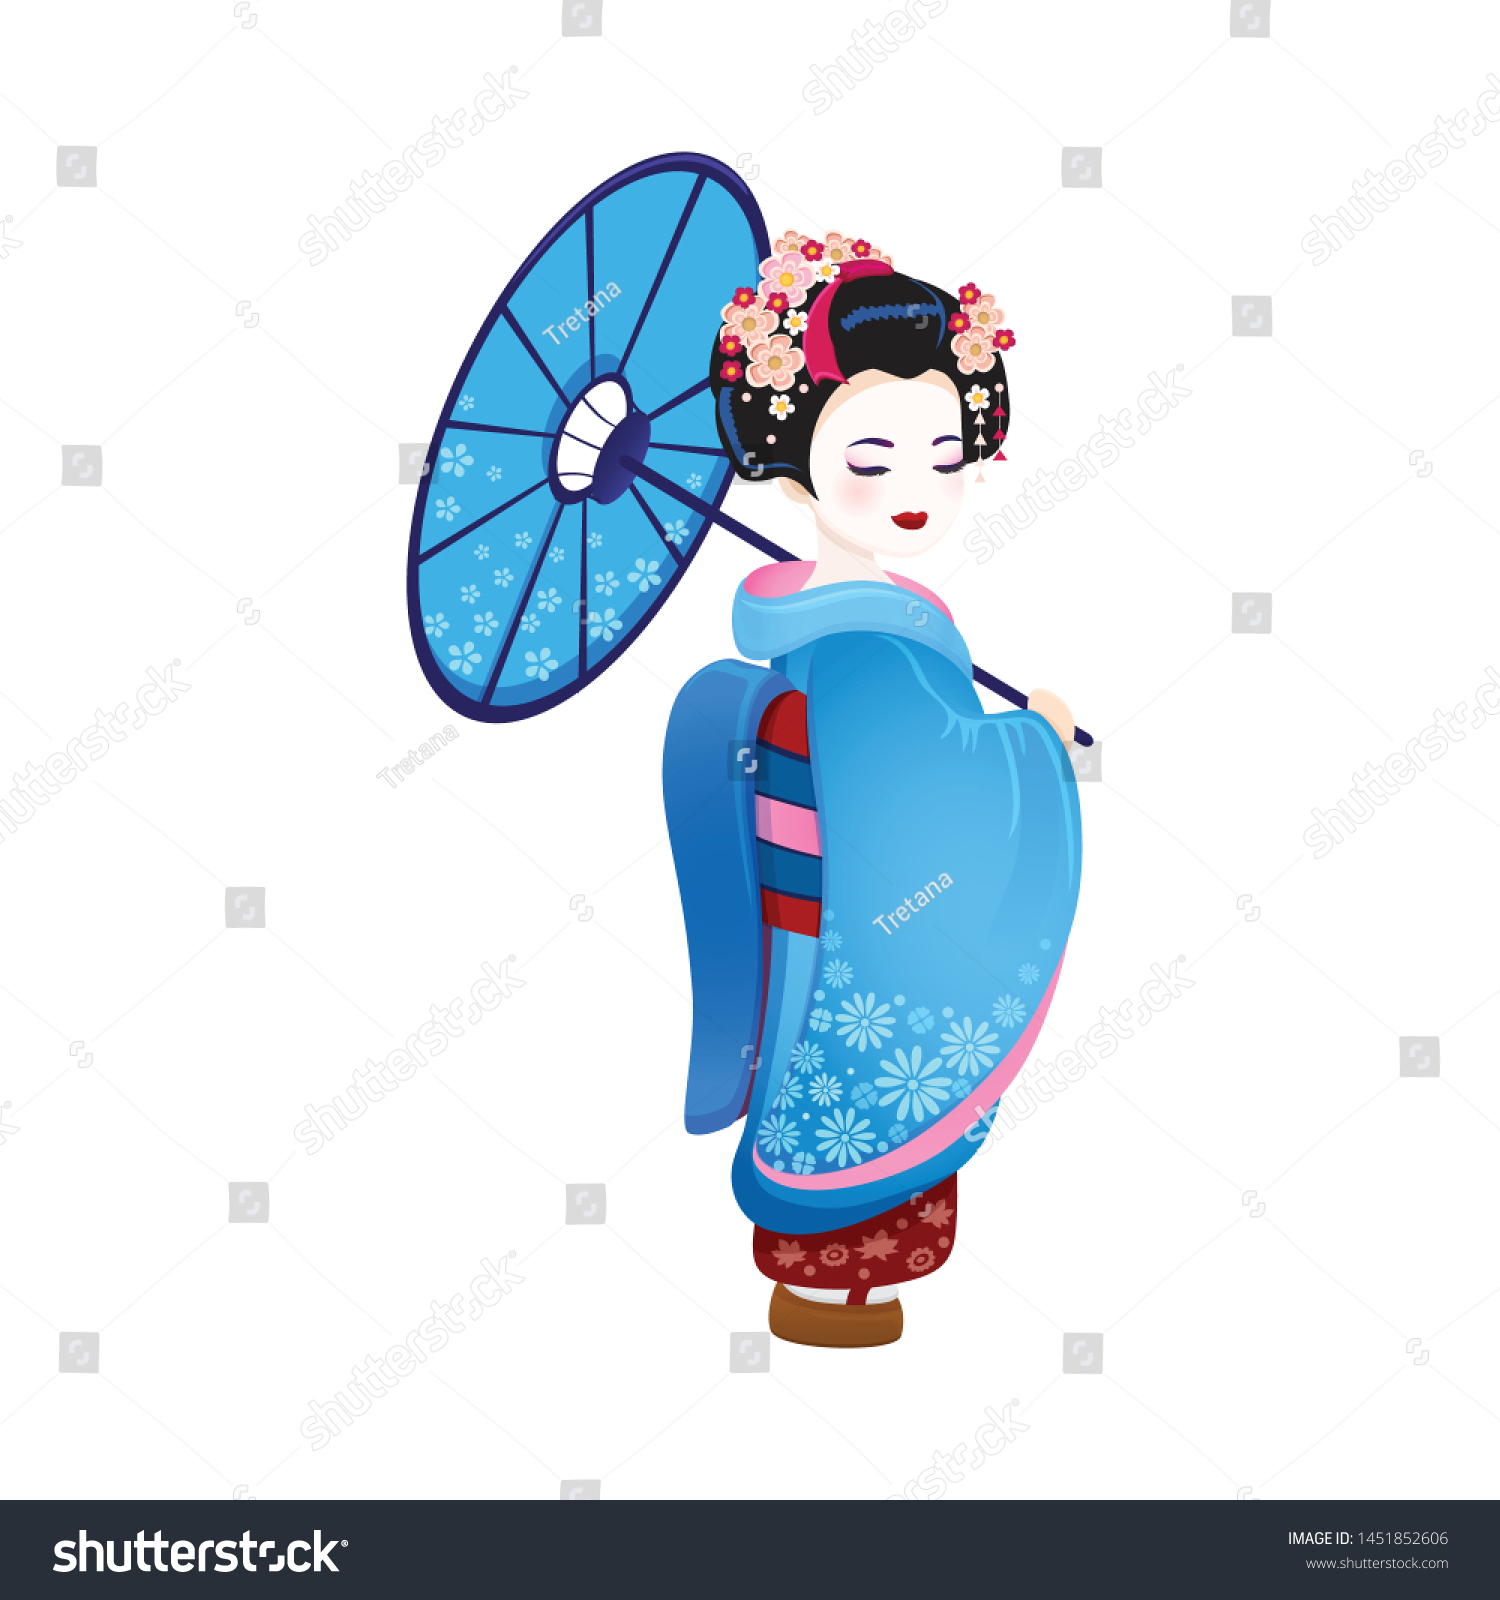 SVG of Beautiful japanese girl in kimono Young Geisha with blue umbrella hanami sakura blossom old kimono makeup maiko hair style shy, Japanese with eyes closed at the festival vector icon isolated on white svg